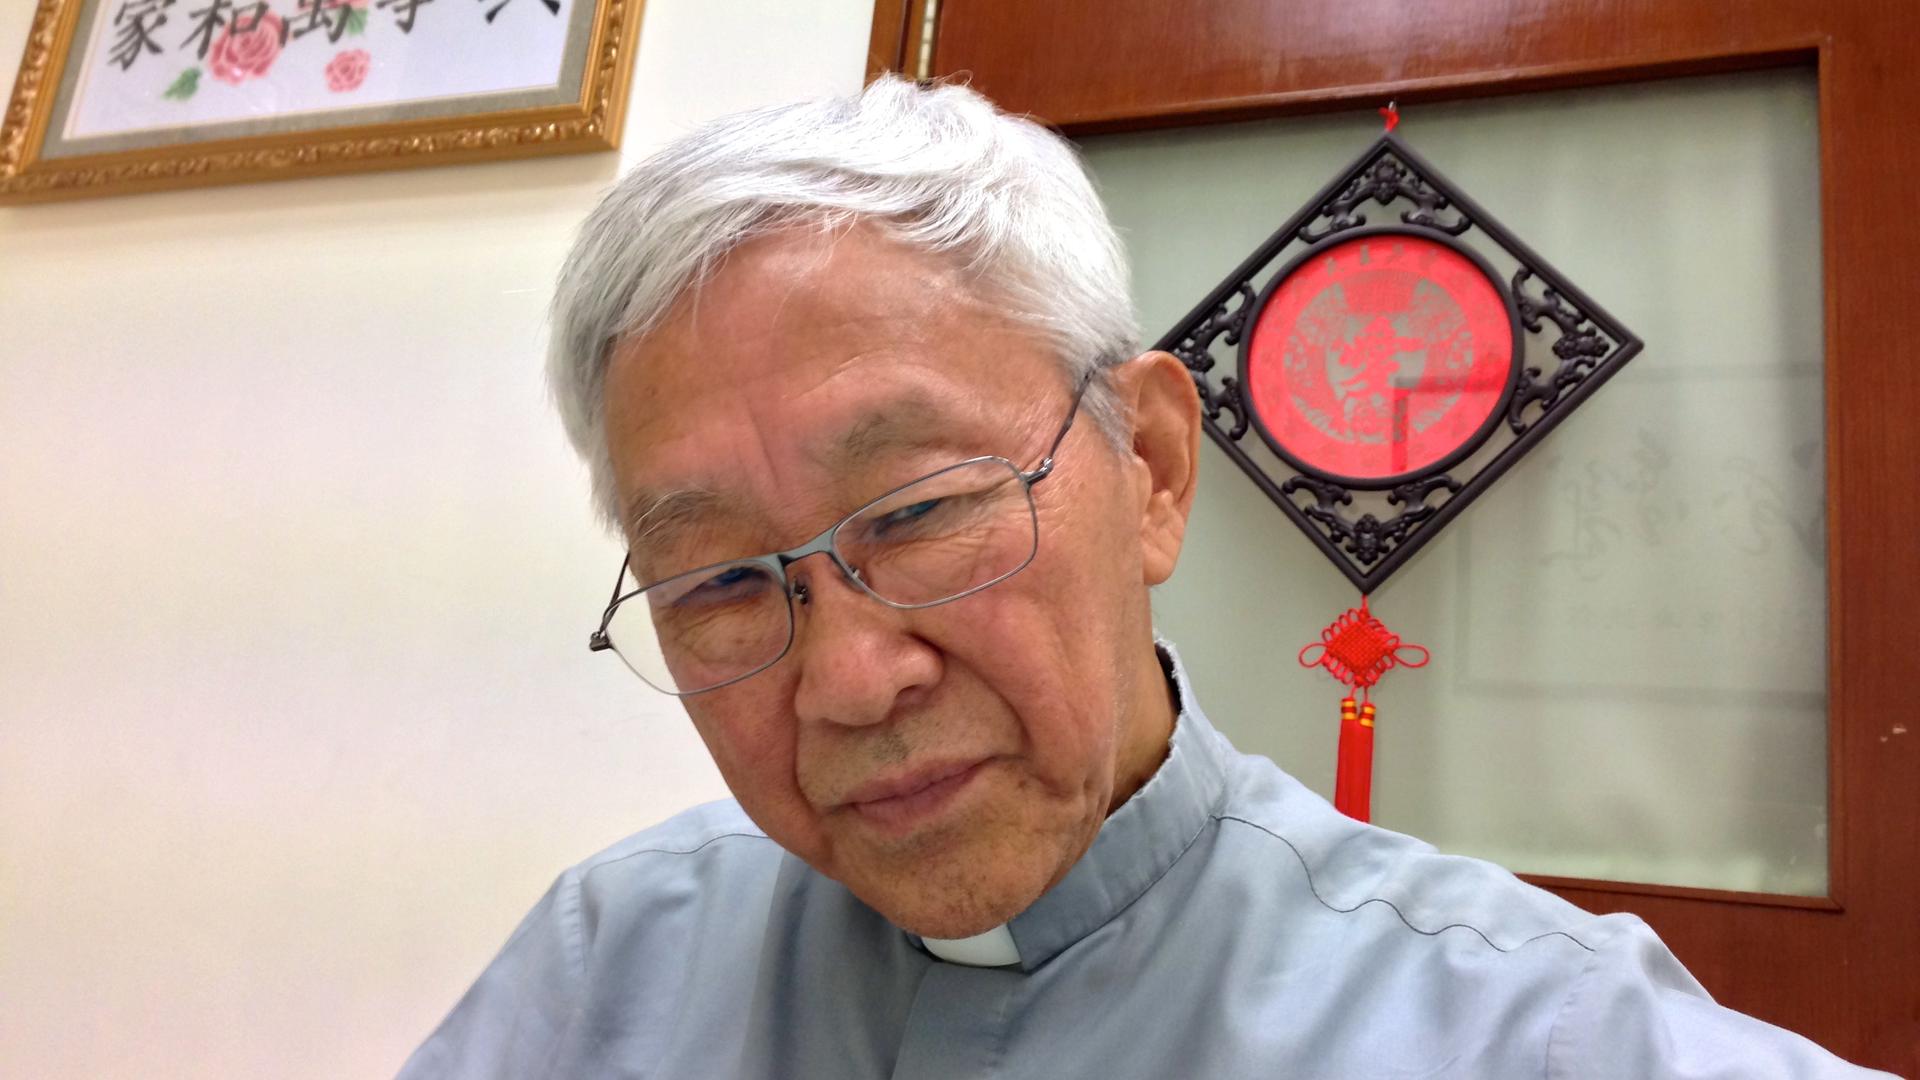 Cardinal Joseph Zen, former head of the Catholic Church in Hong Kong, is a long-time critic of the Chinese Communist Party. He's also been an active supporter of the pro-democracy campaign.